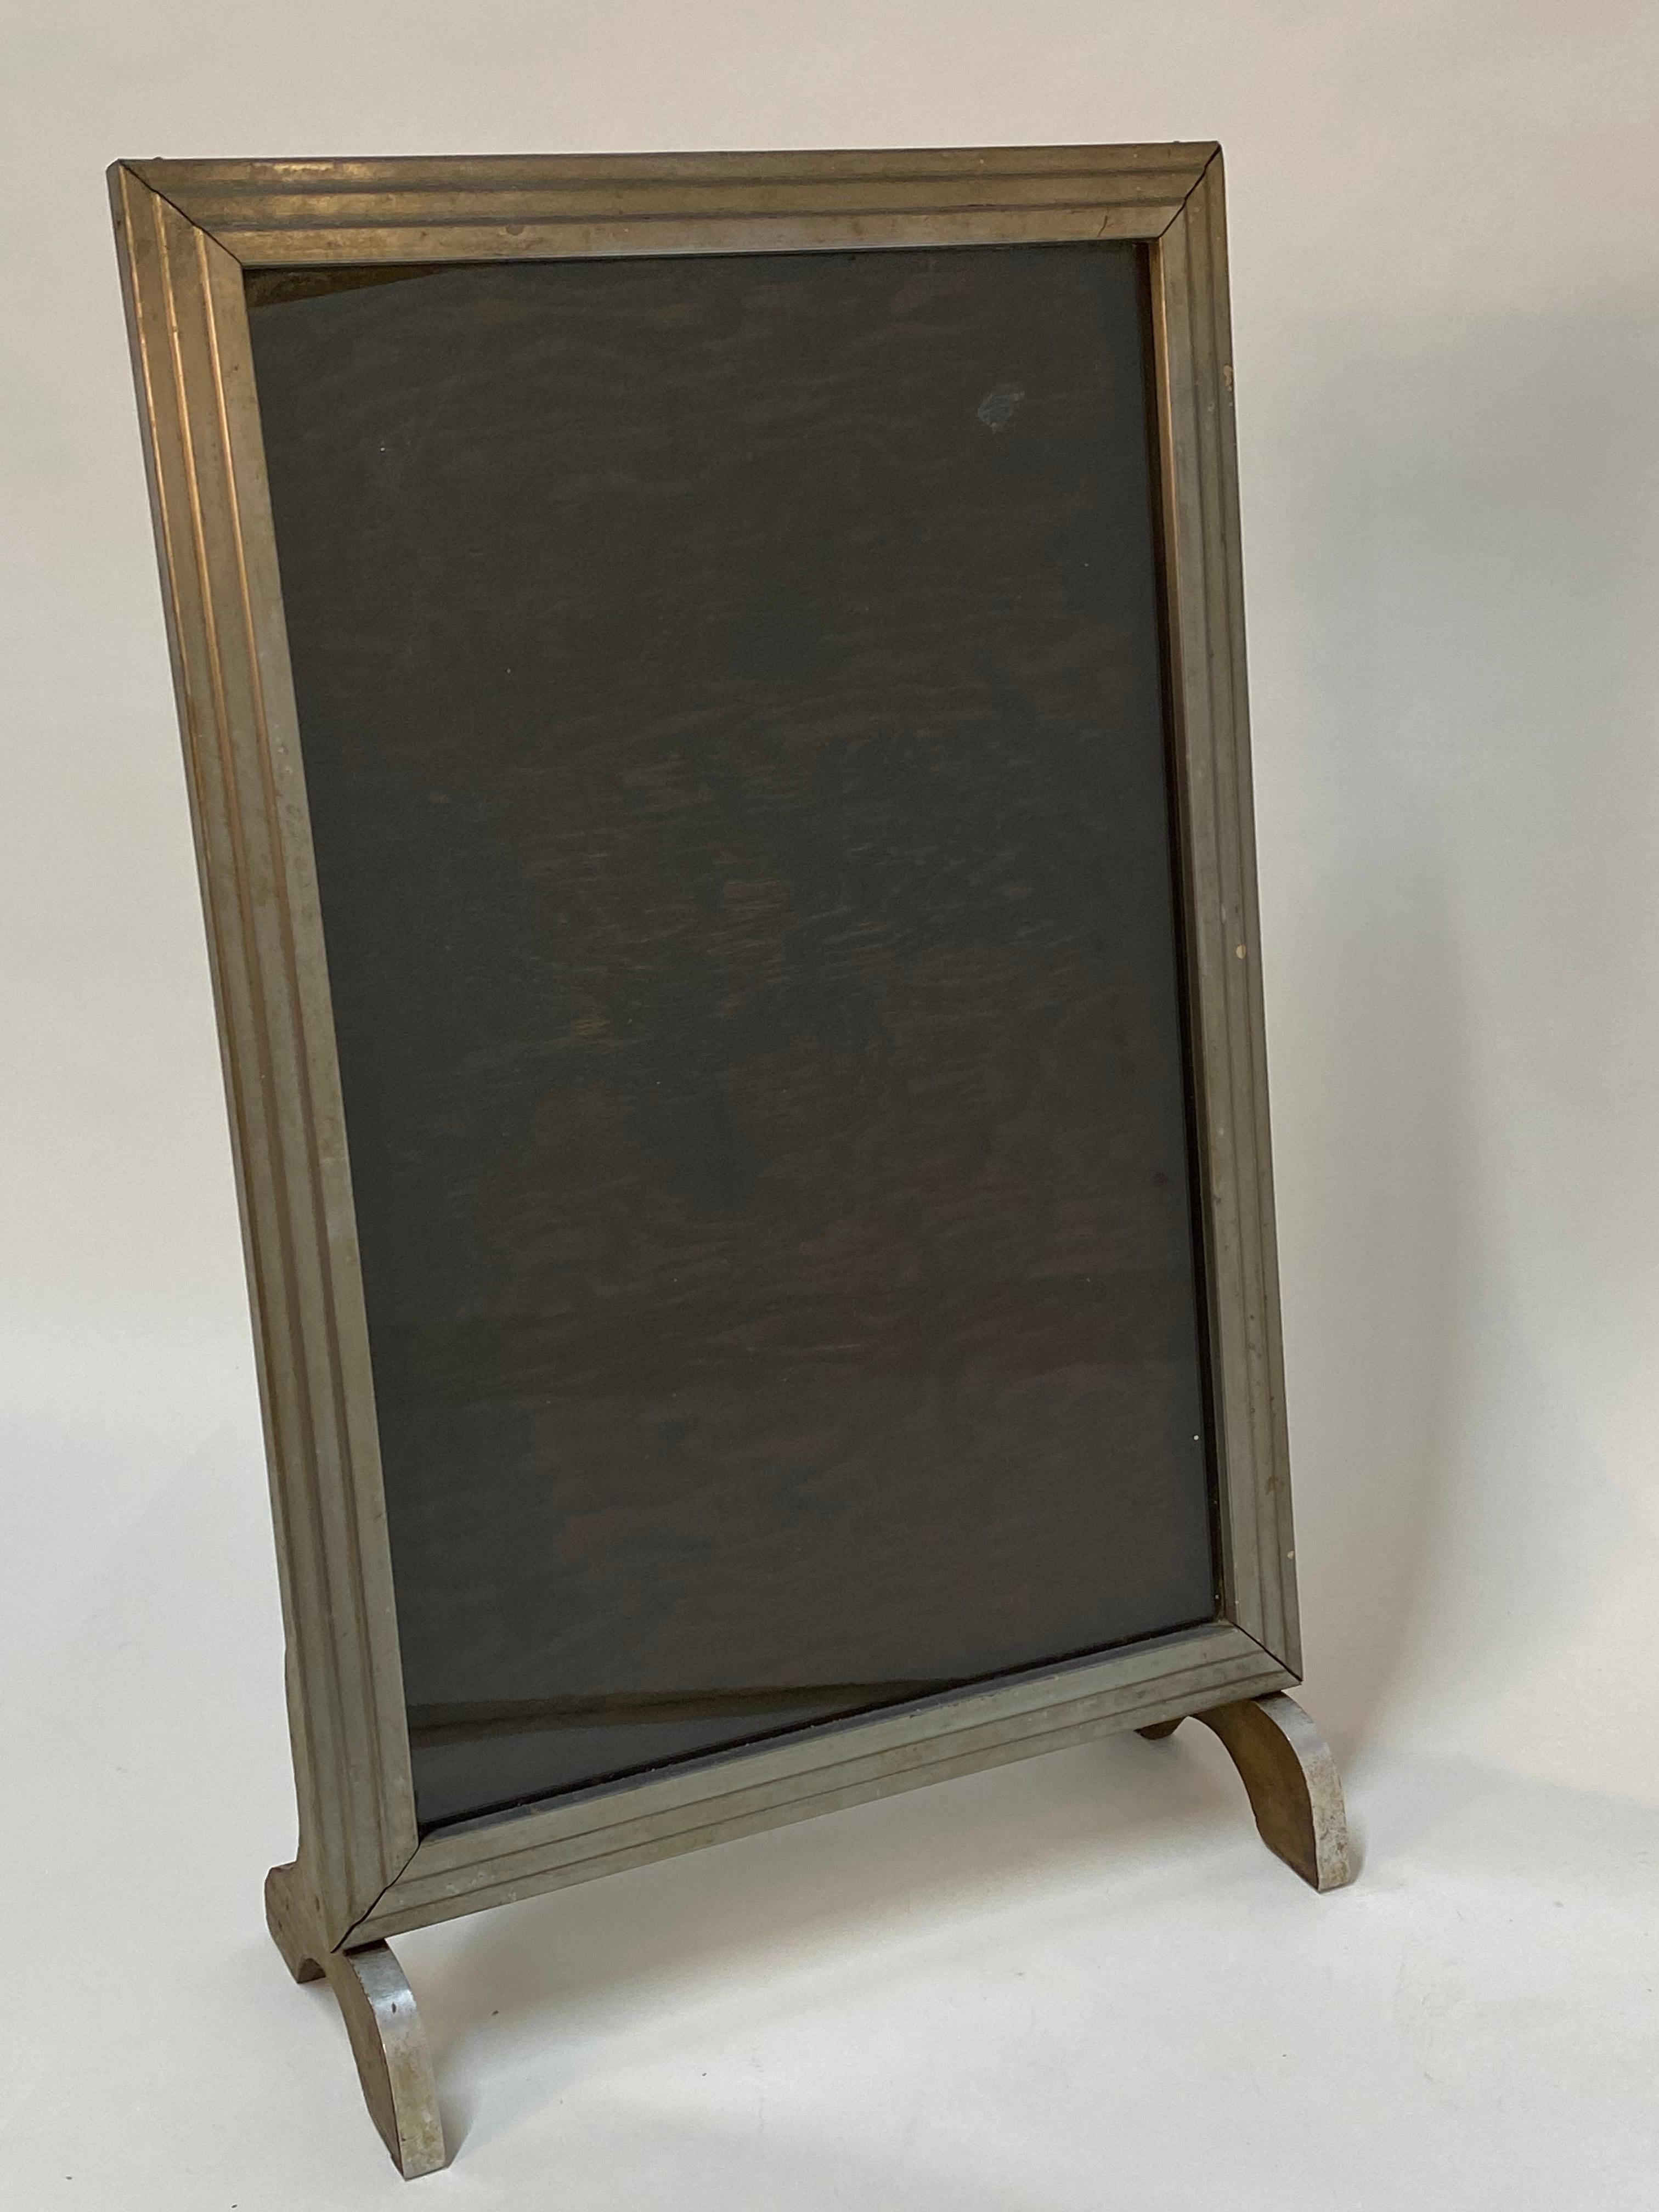 Large Art Deco Nickel Clad Frame In Good Condition For Sale In Garnerville, NY